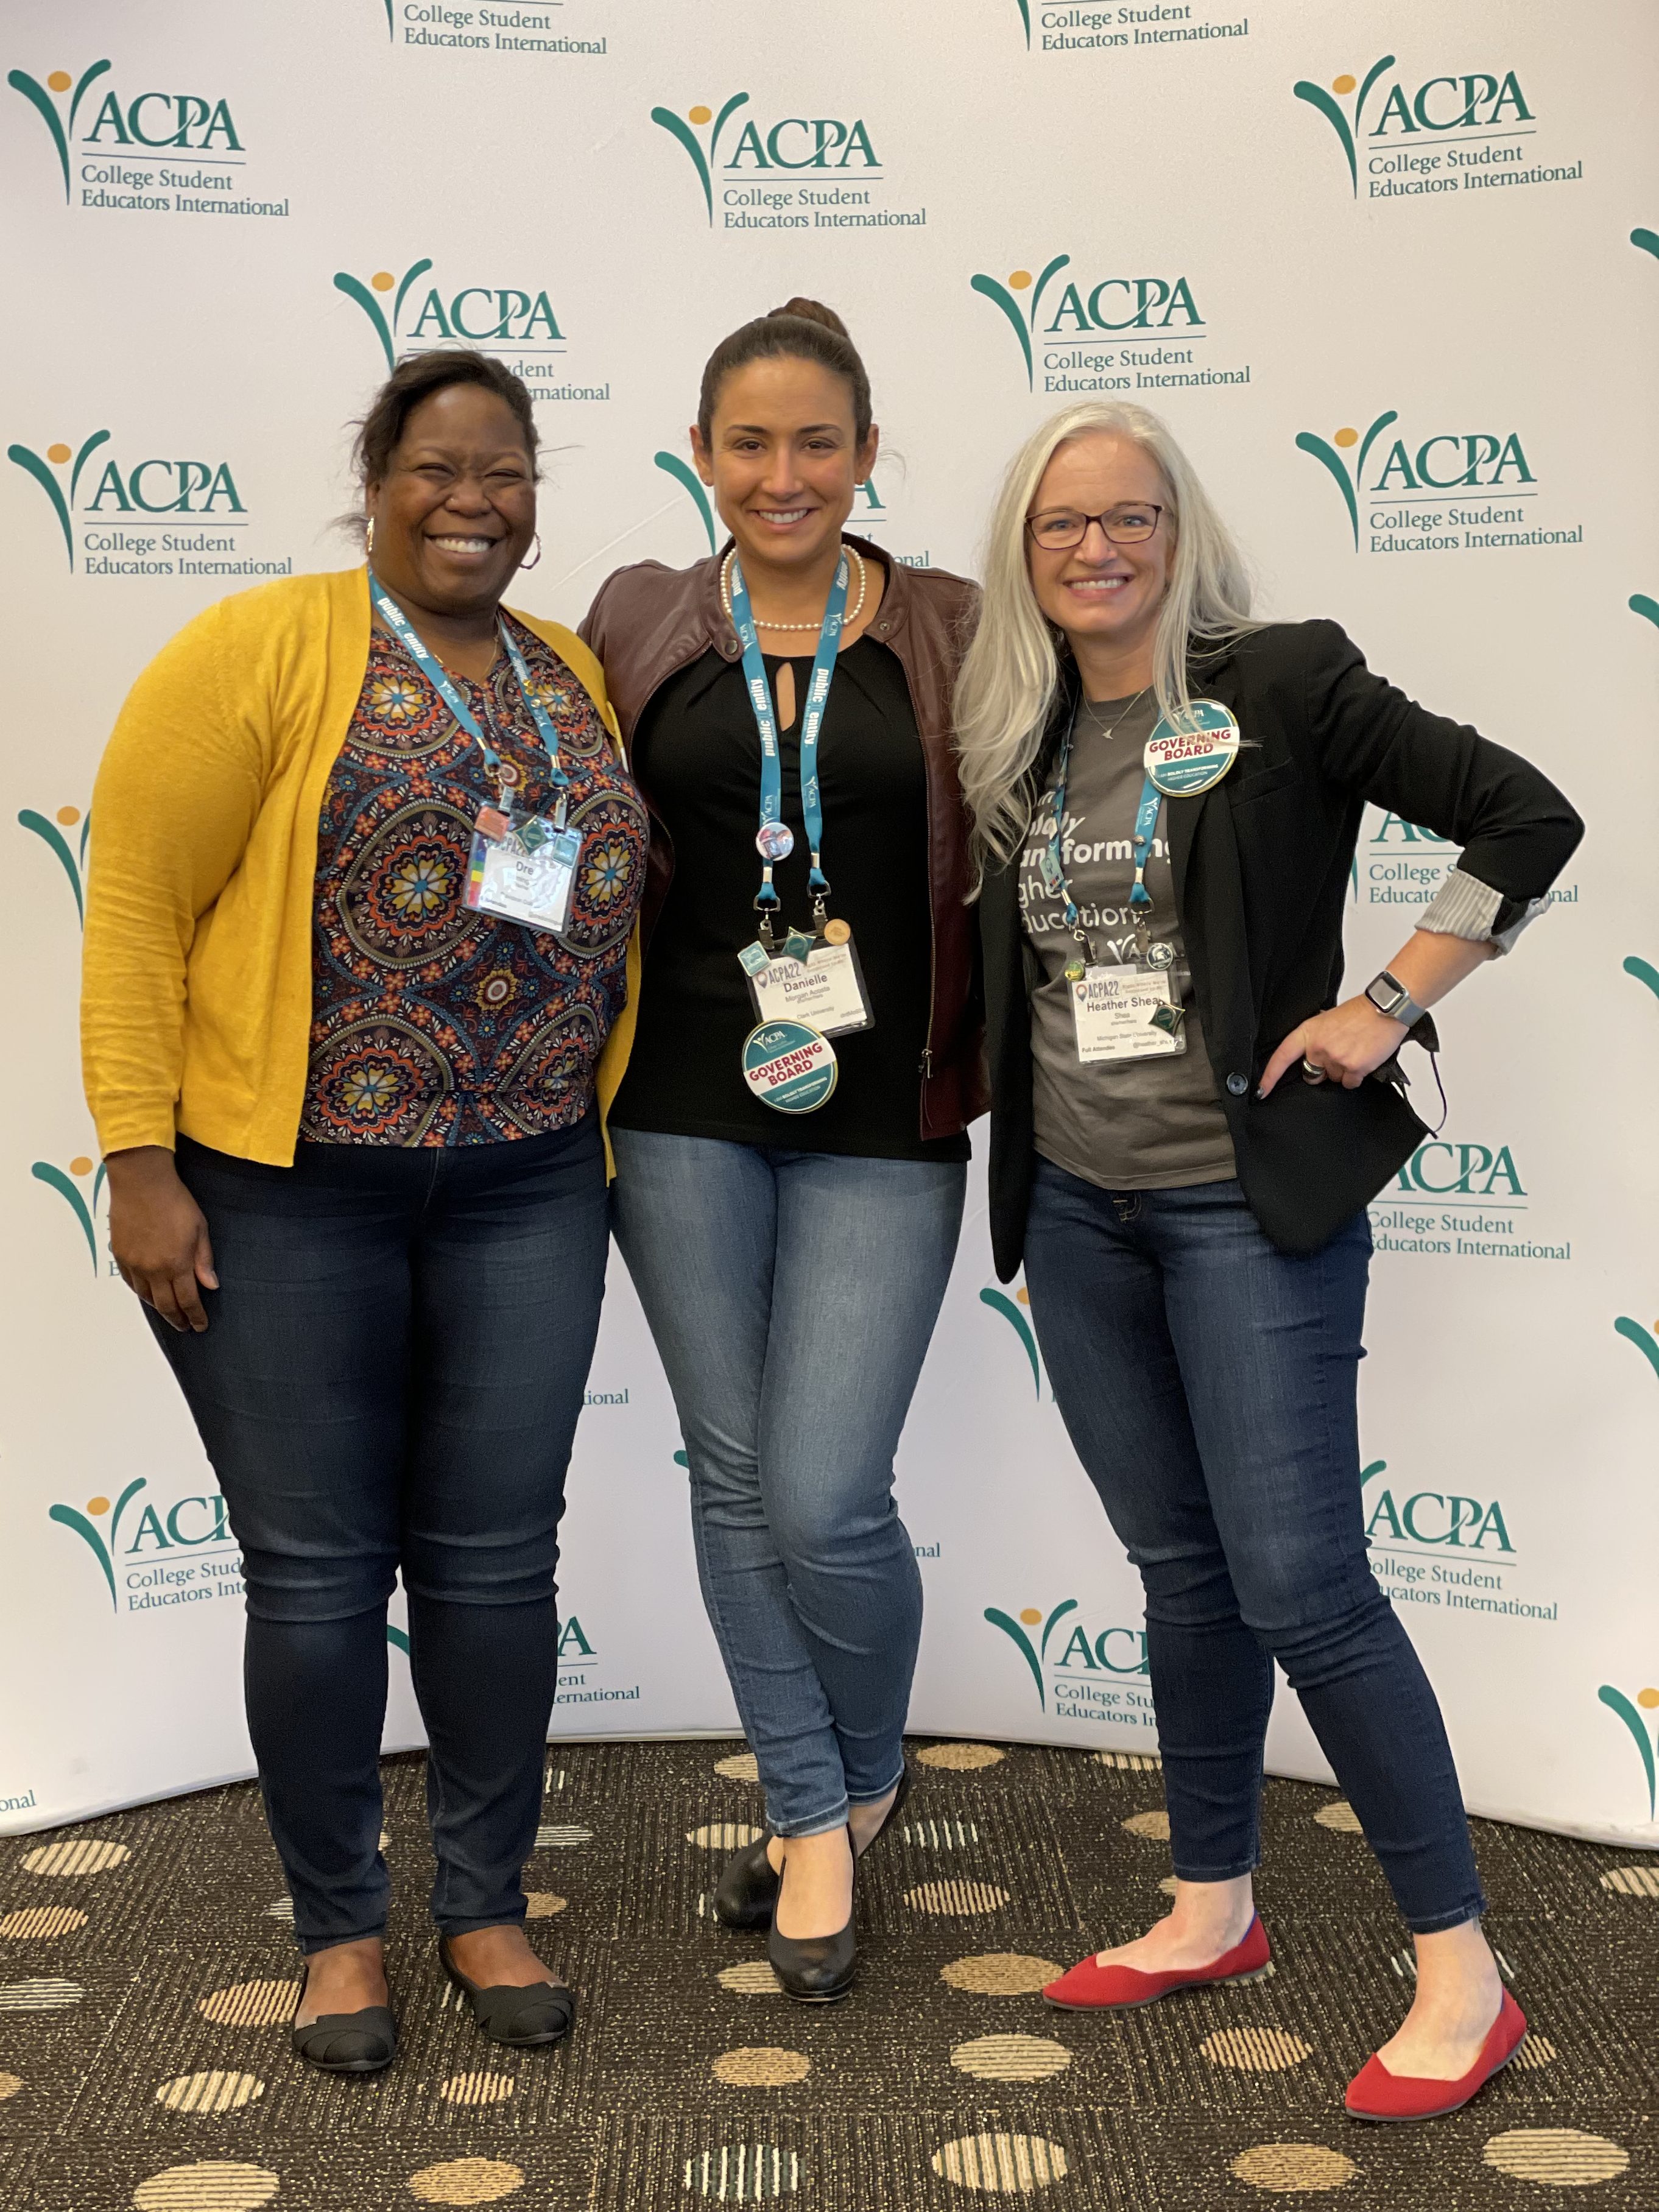 ACPA Presidentail Trio at the ACPA 2022 Convention